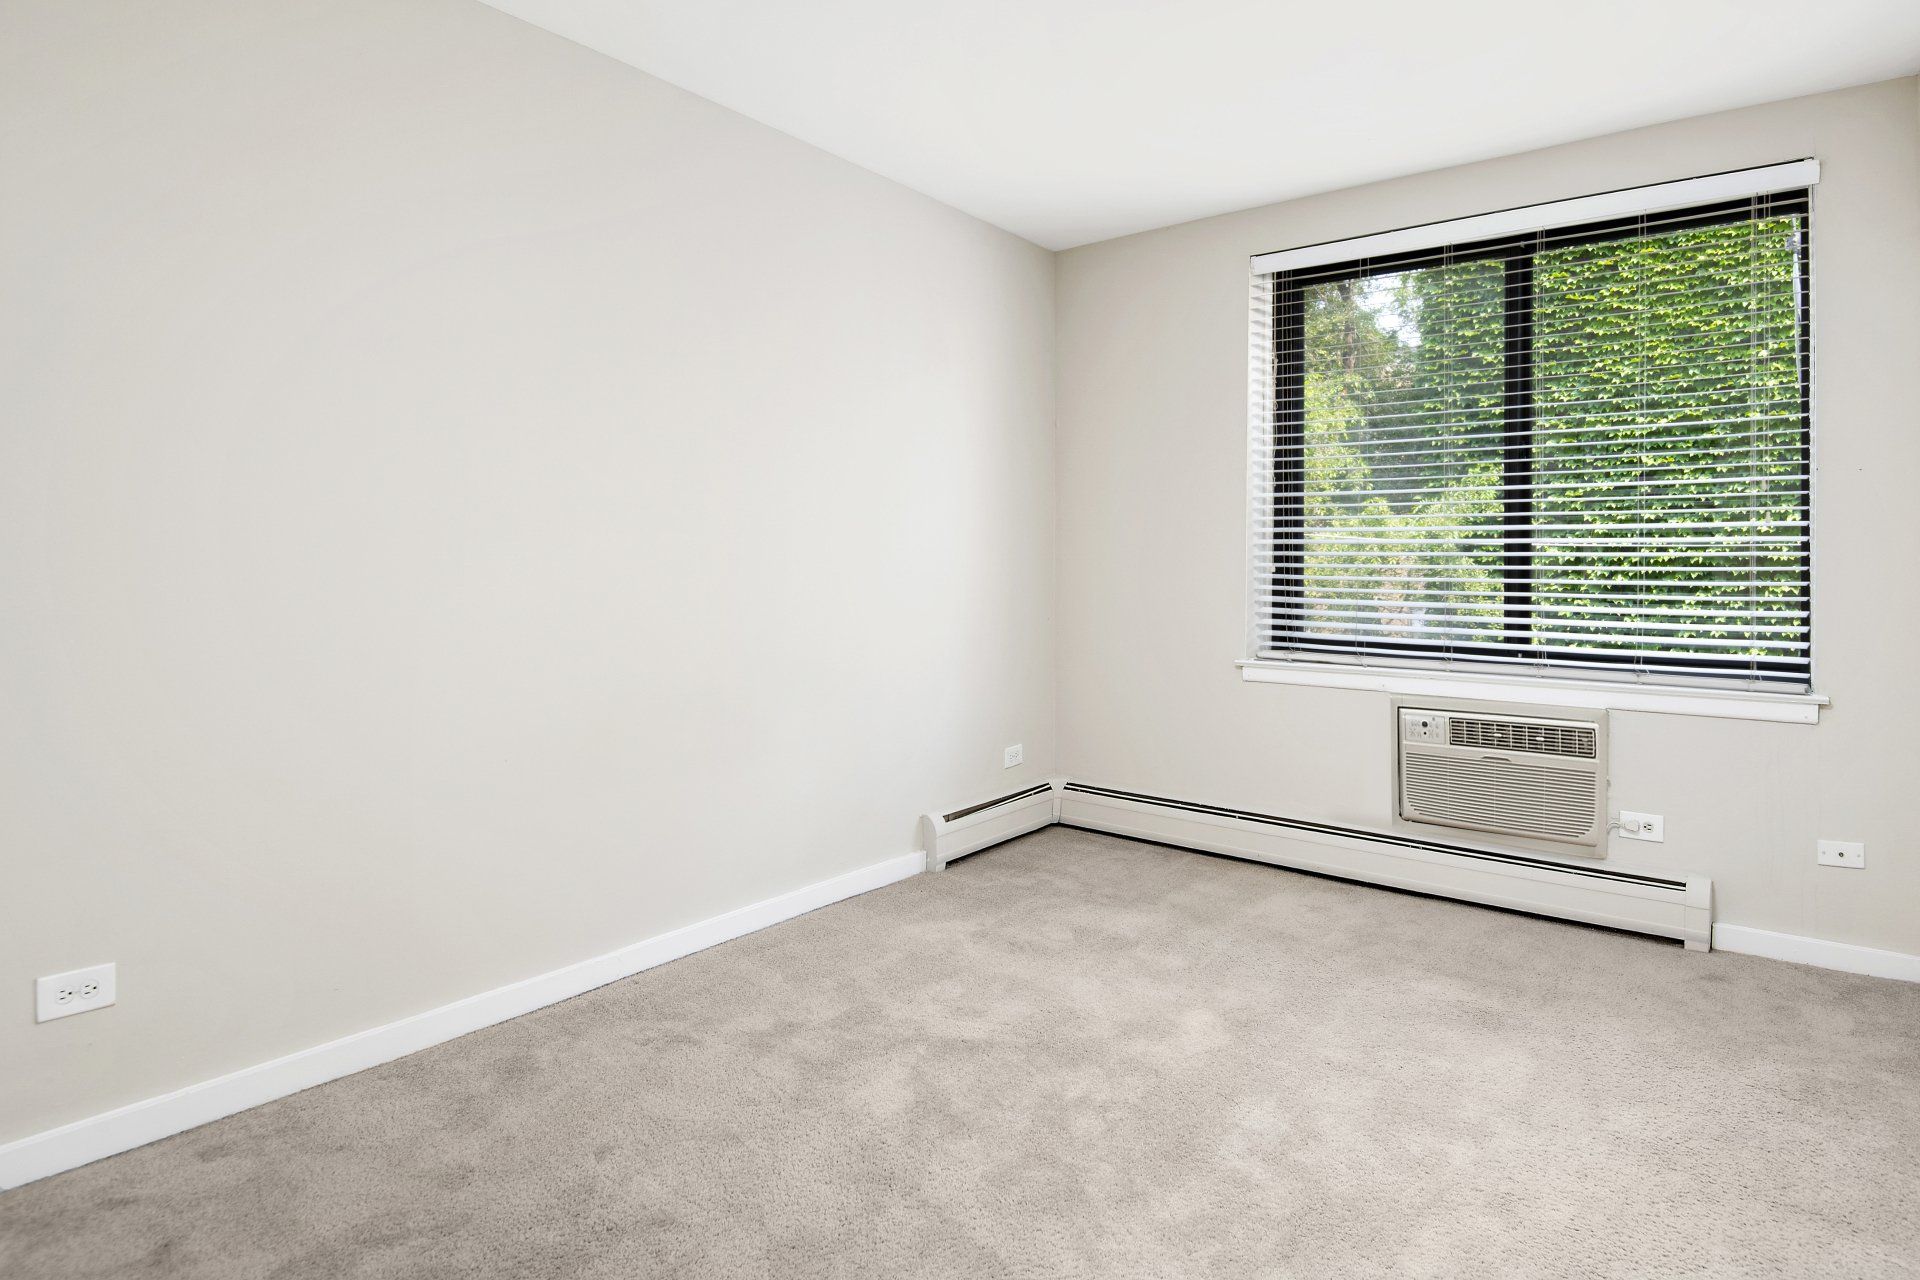 An empty bedroom with a window and air conditioner at Reside on Pine Grove.